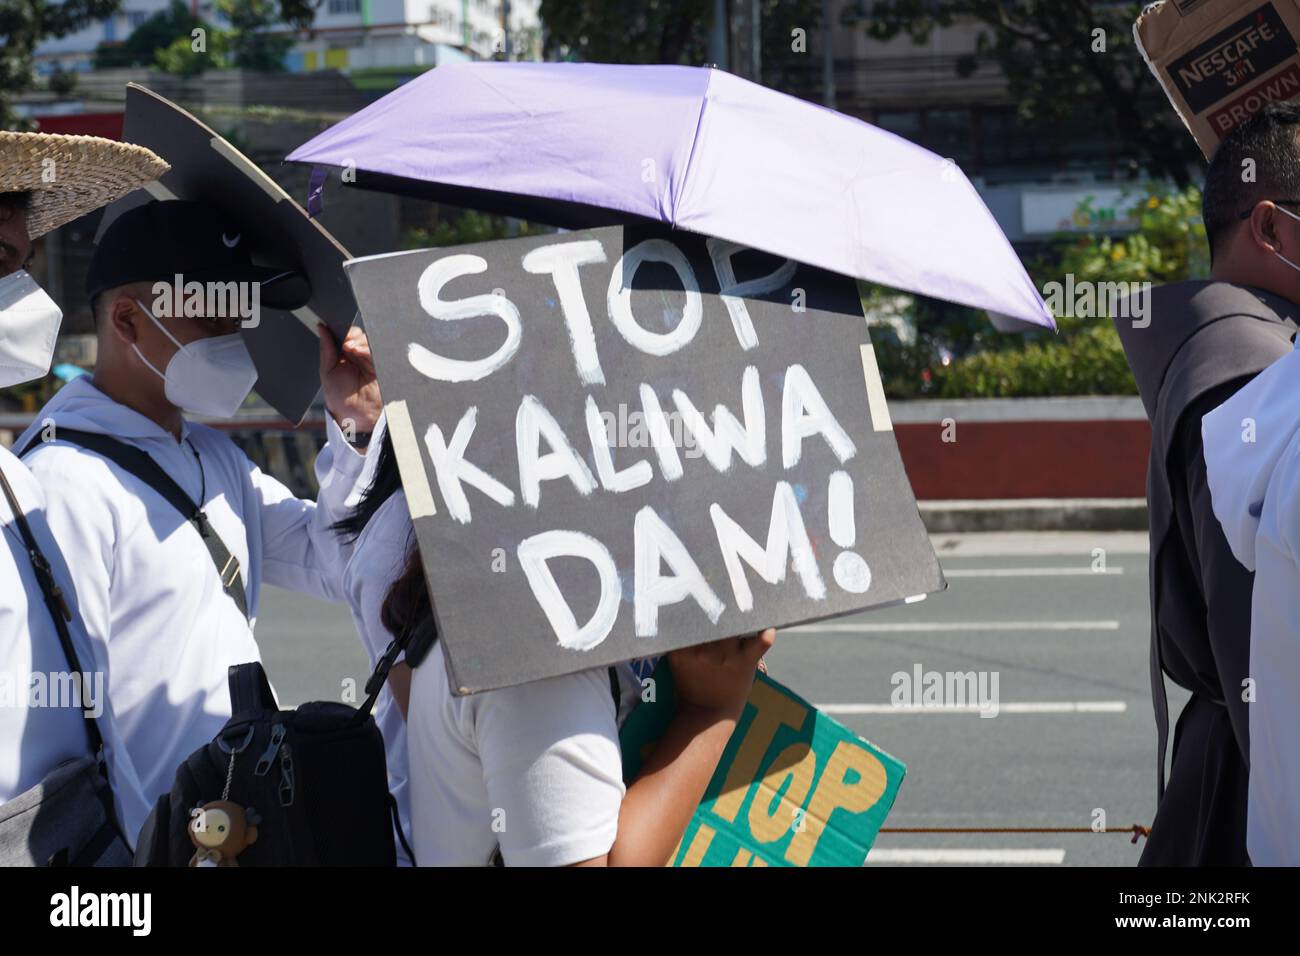 Quezon City, Philippines. 23rh February, 2023. Around 300 indigenous people (IP) belonging to Dumagat-Remontado tribe, together with environmental groups and advocates culminates their 150 kilometers “Alay Lakad Laban sa Kaliwa Dam” (Sacrifice Walk Against the Construction of Kaliwa Dam) going to Malacanang Palace on February 23, 2023. The nine-day sacrificial walk is portraying their opposition on the construction of the New Centennial Water Source–Kaliwa Dam Project (NWCP-KDP), in the borders of Rizal and Quezon Province. The mega-dam project will be submerging almost hundred hectares of anc Stock Photo